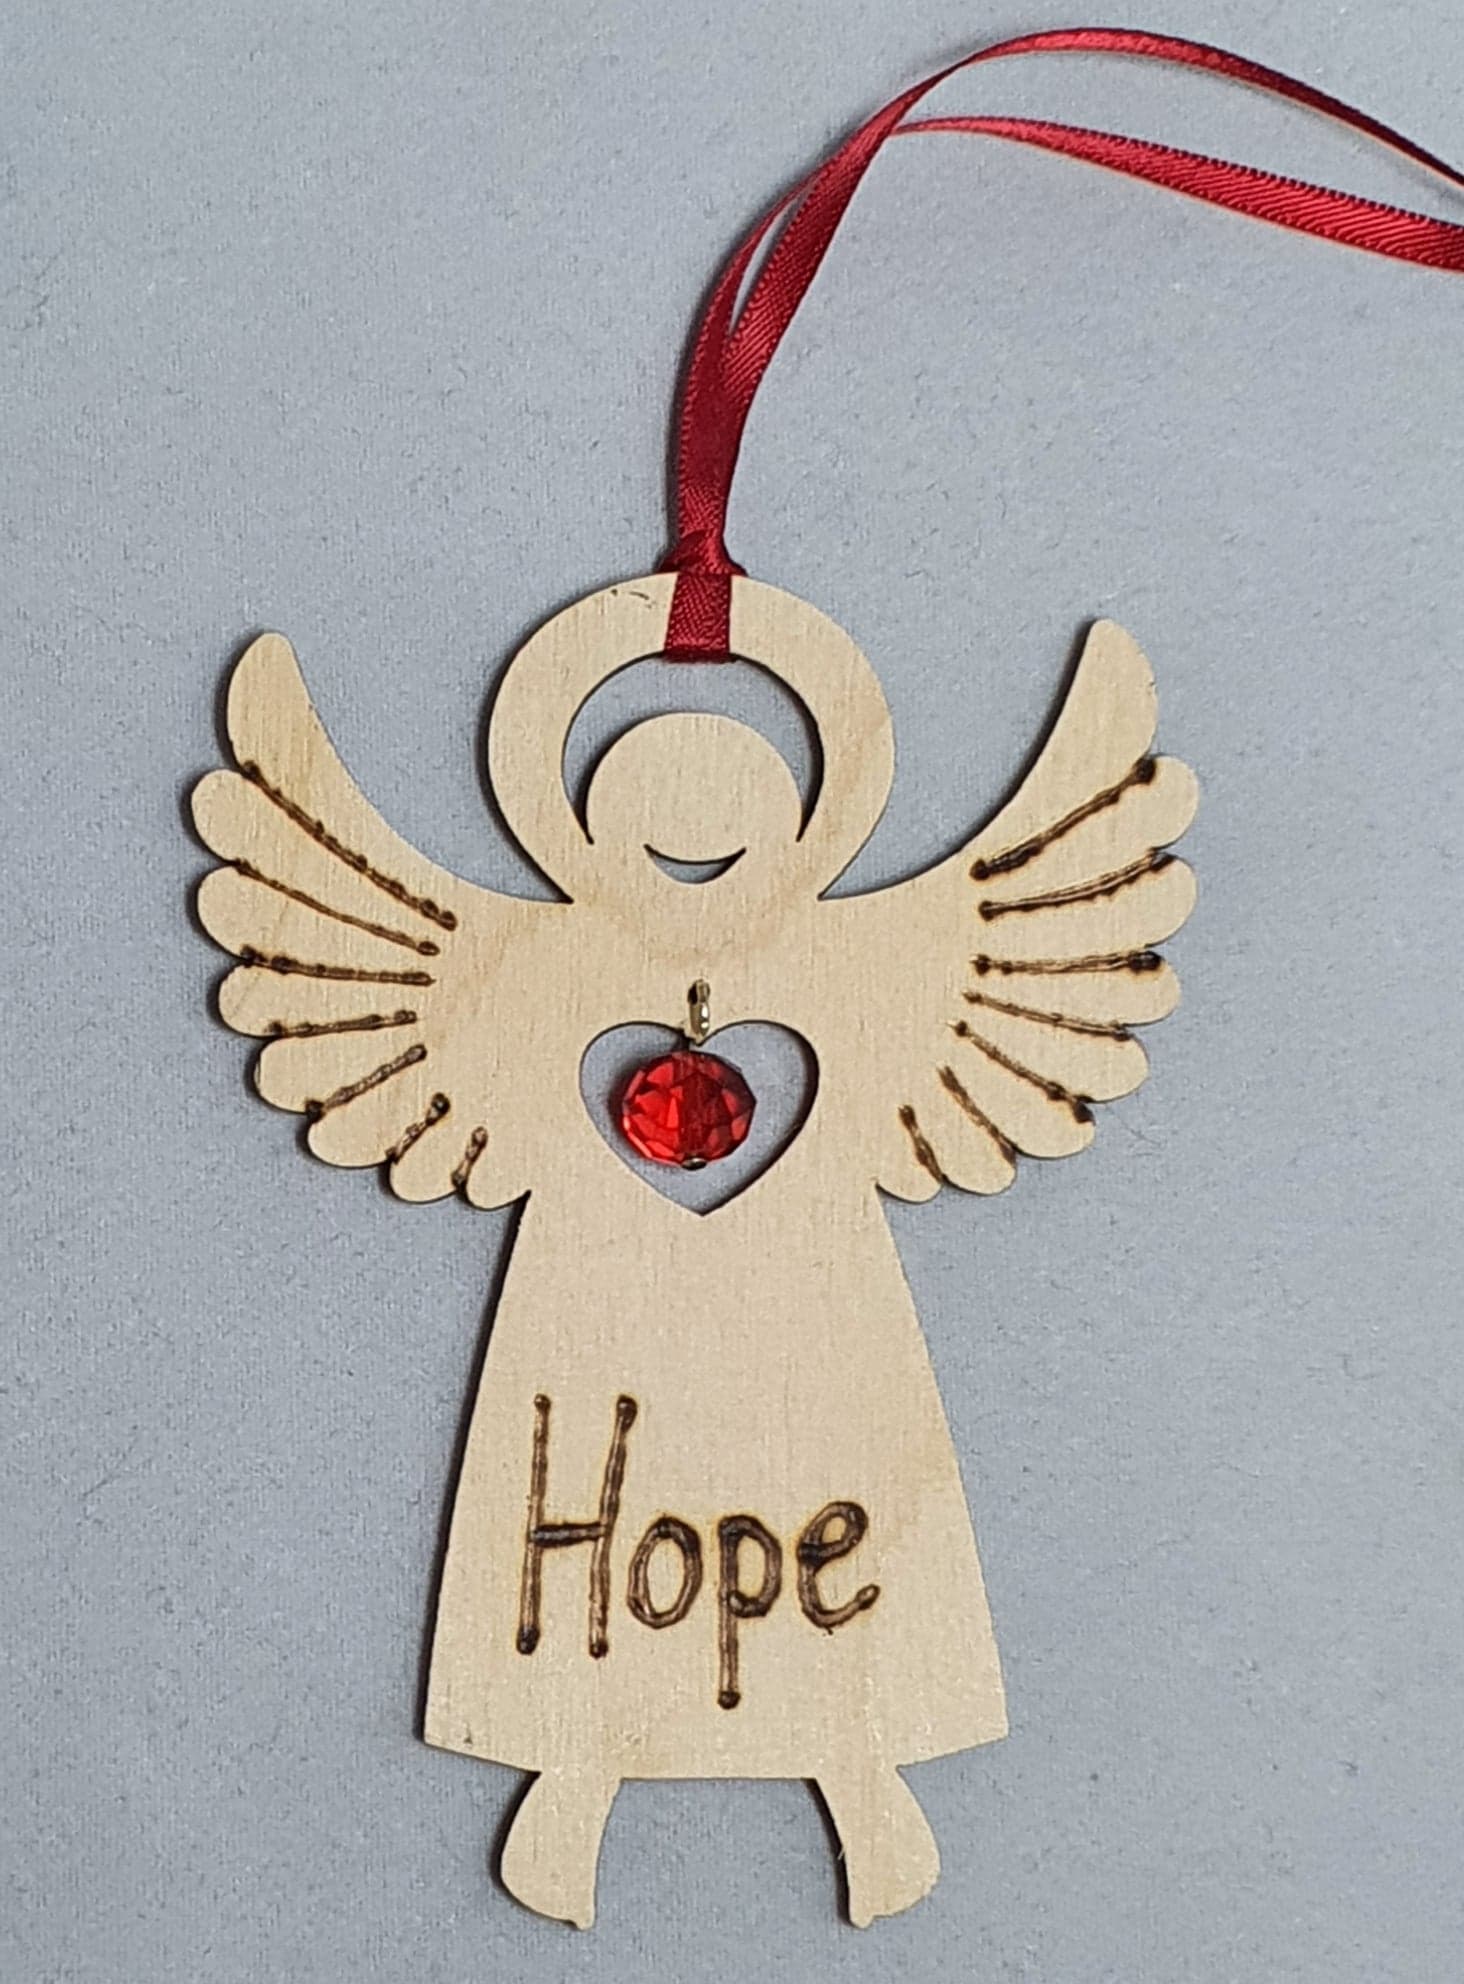 Rustic Charm Angel with word "Hope"